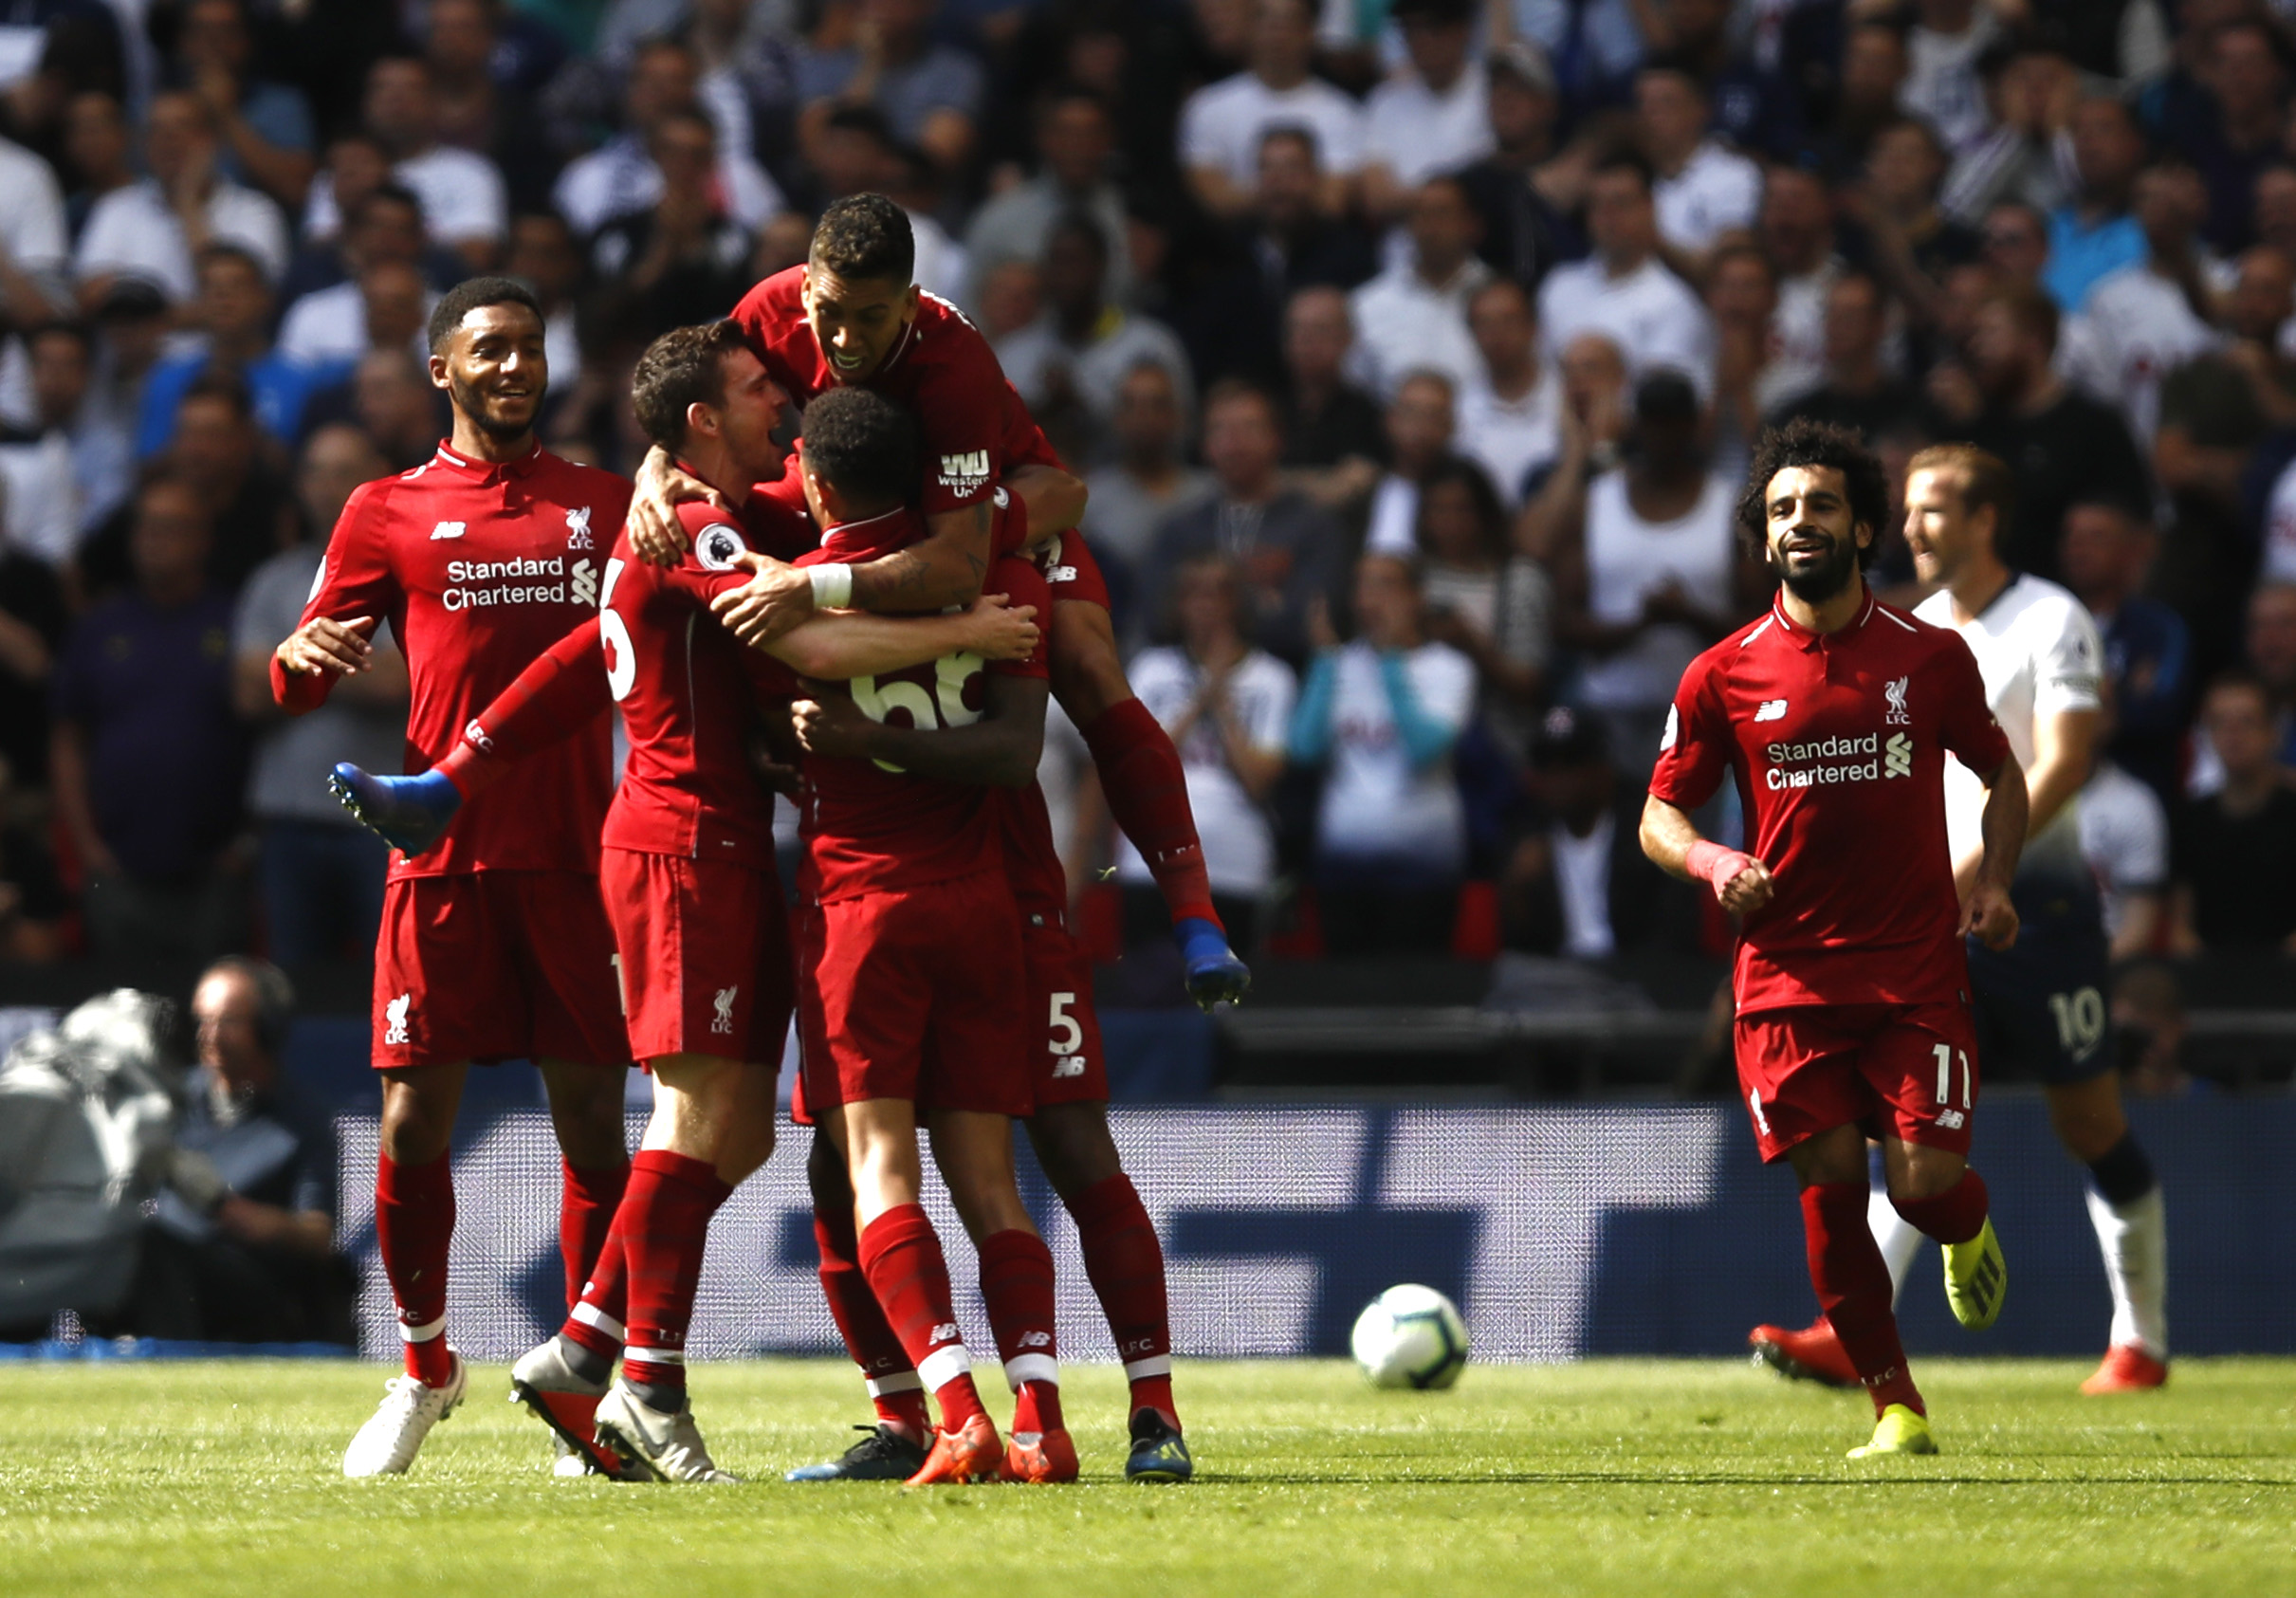 LONDON, ENGLAND - SEPTEMBER 15:  Georginio Wijnaldum of Liverpool celebrates with teammates after scoring his team's first goal during the Premier League match between Tottenham Hotspur and Liverpool FC at Wembley Stadium on September 15, 2018 in London, United Kingdom.  (Photo by Julian Finney/Getty Images)